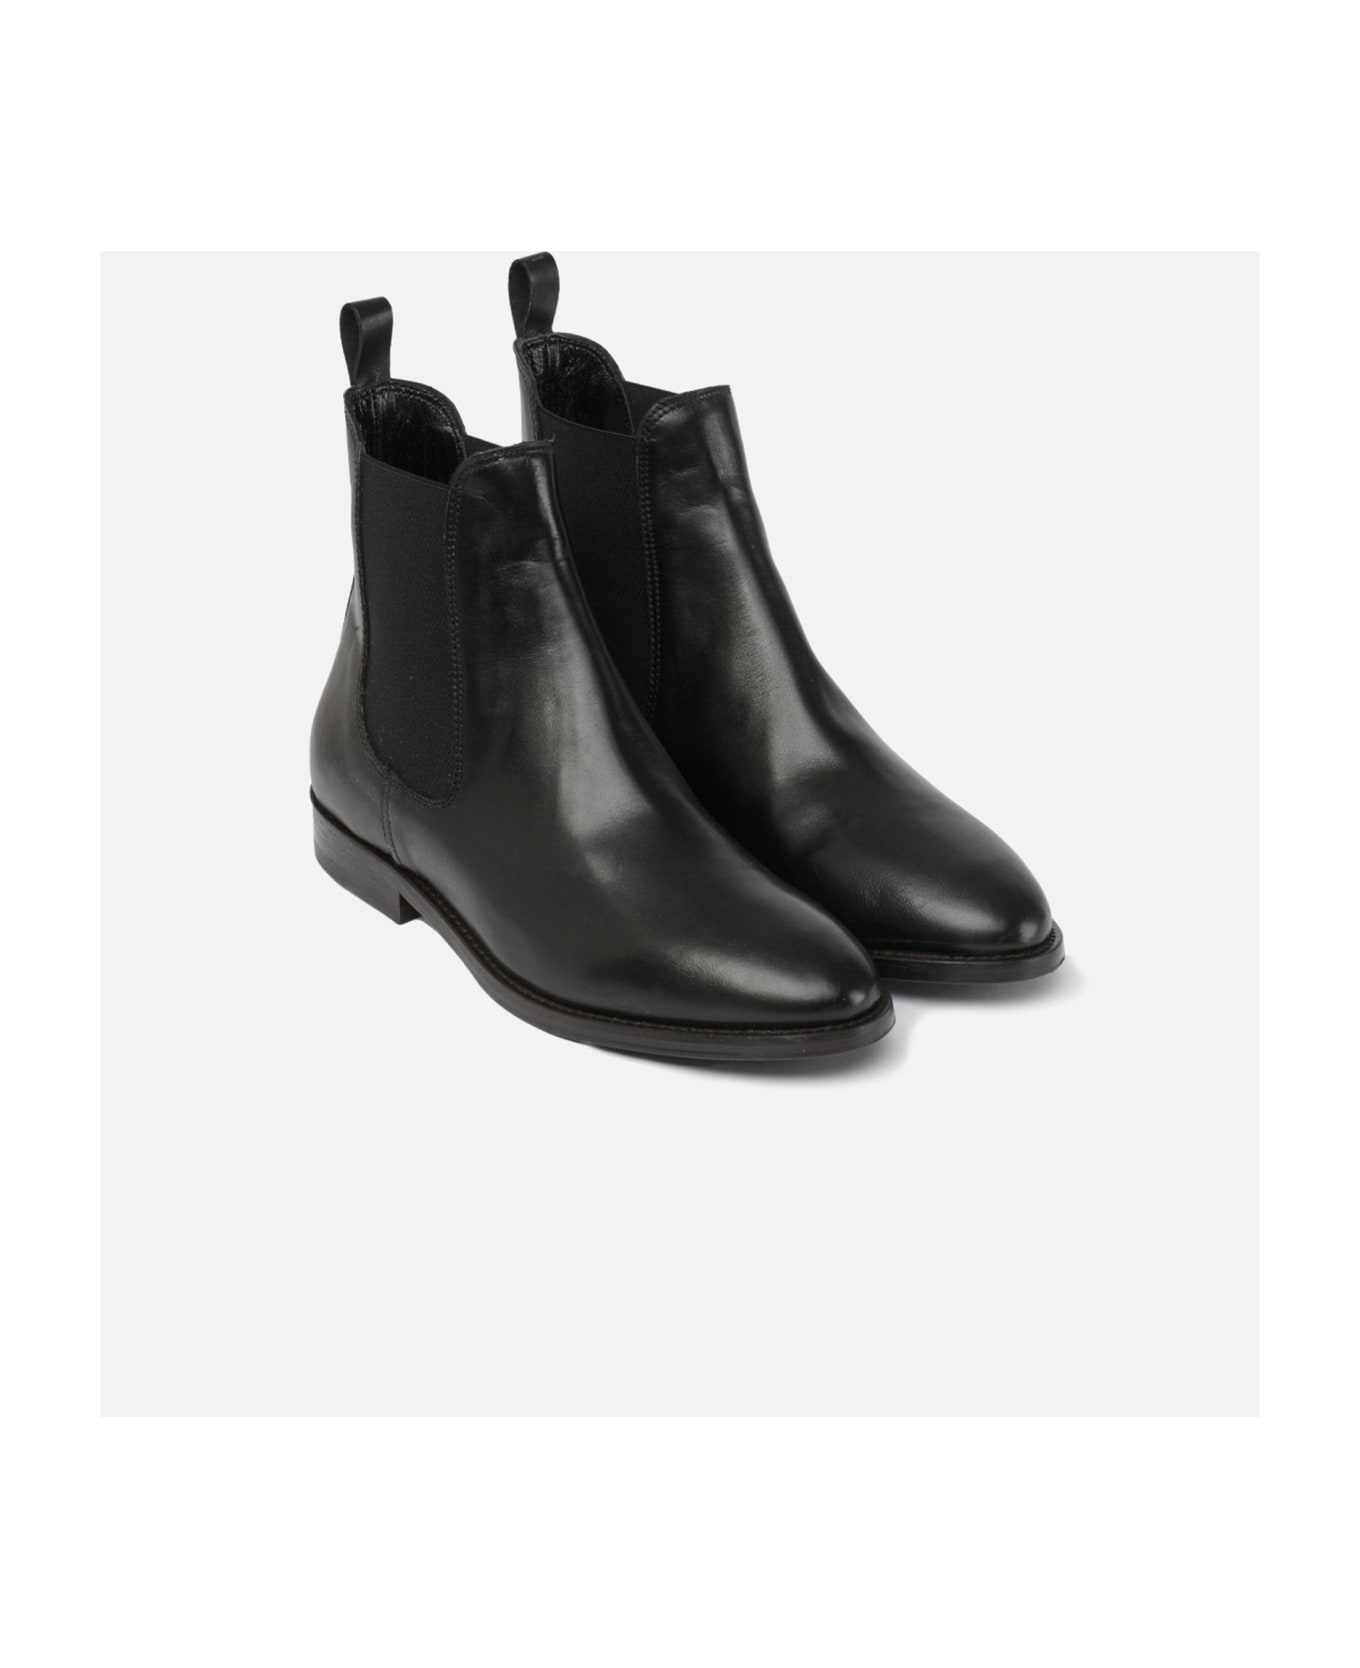 CB Made in Italy Leather Boots Sessanta - Black